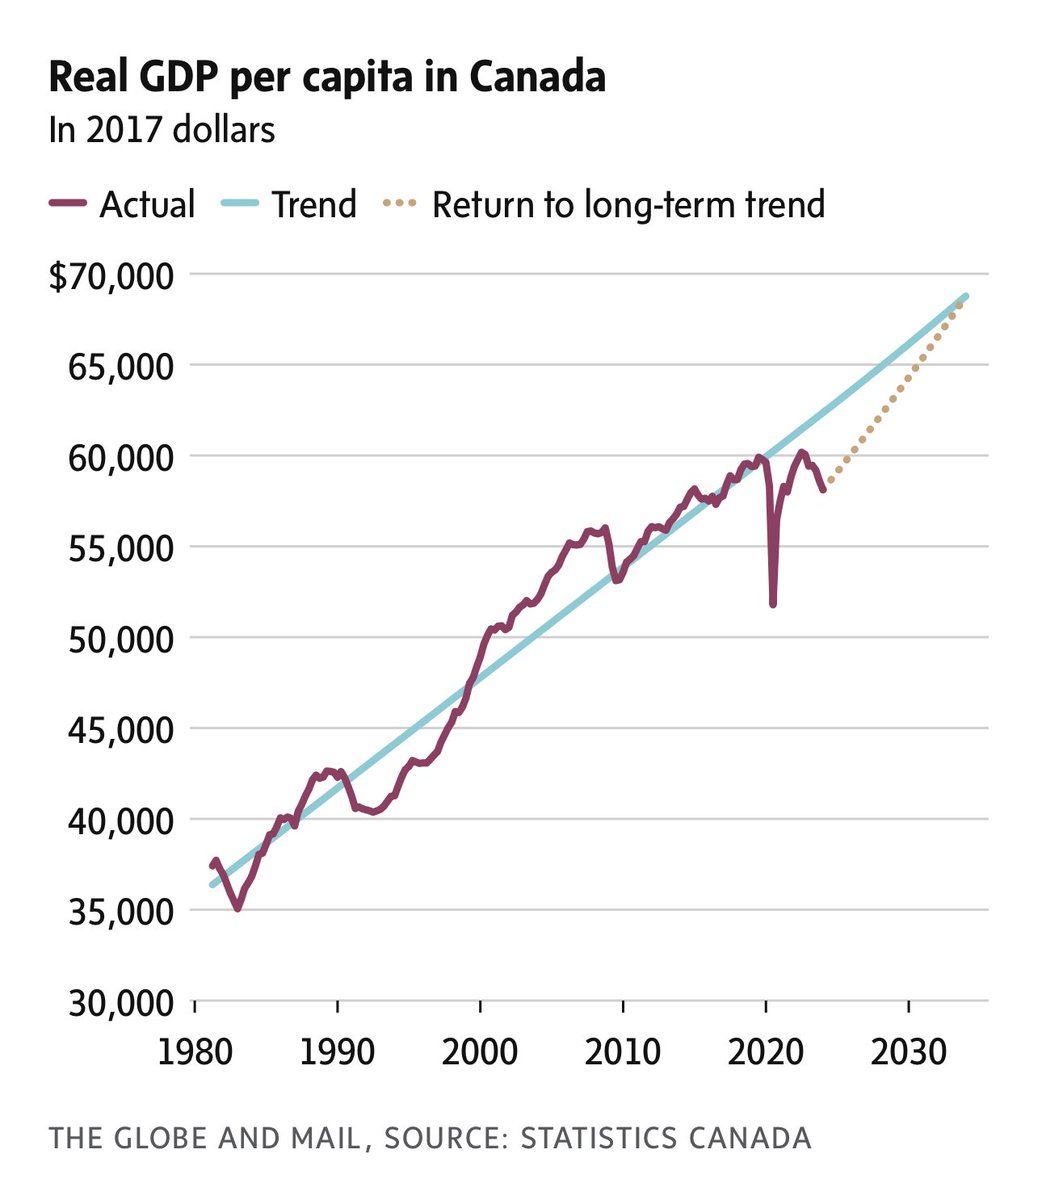 Canada’s economic output on a per capita basis has slipped to 7% below its long-term trend, amounting to a decline of $4,200 a person, according to a report published Wednesday by StatCan theglobeandmail.com/business/artic… #cdnpoli #Canada